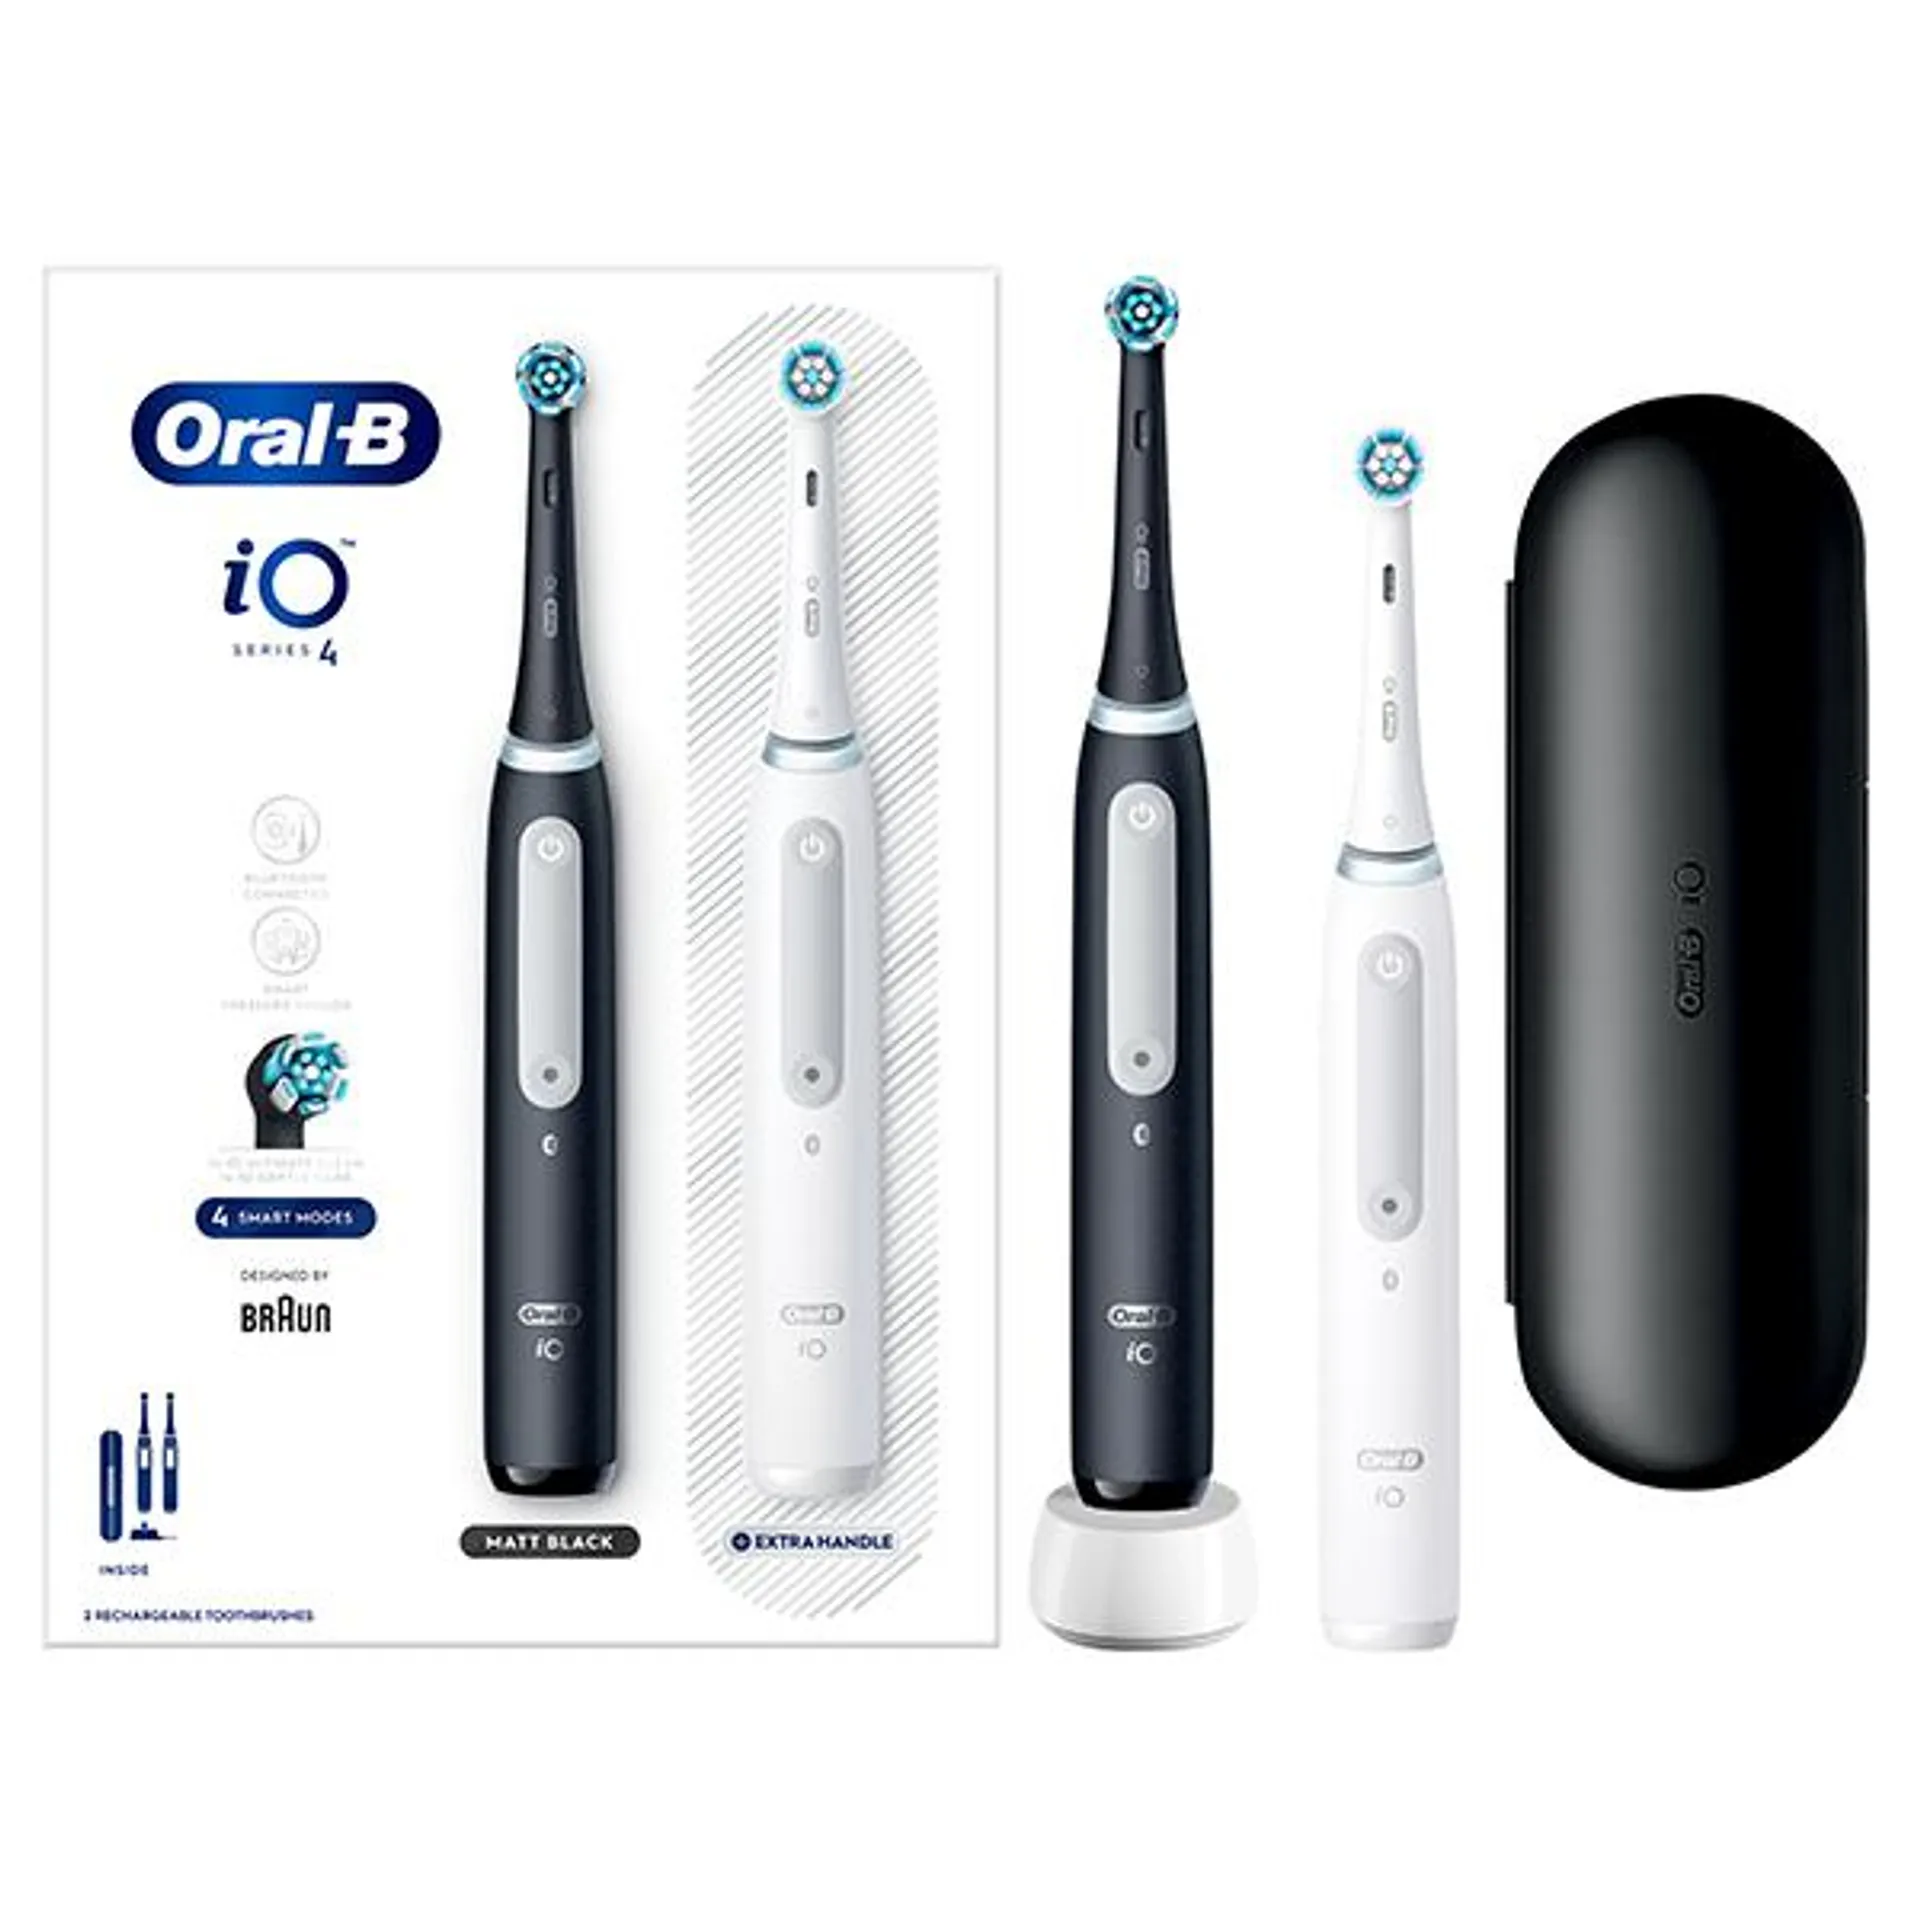 Oral-B iO4 Black & White Electric Toothbrush Duo Pack